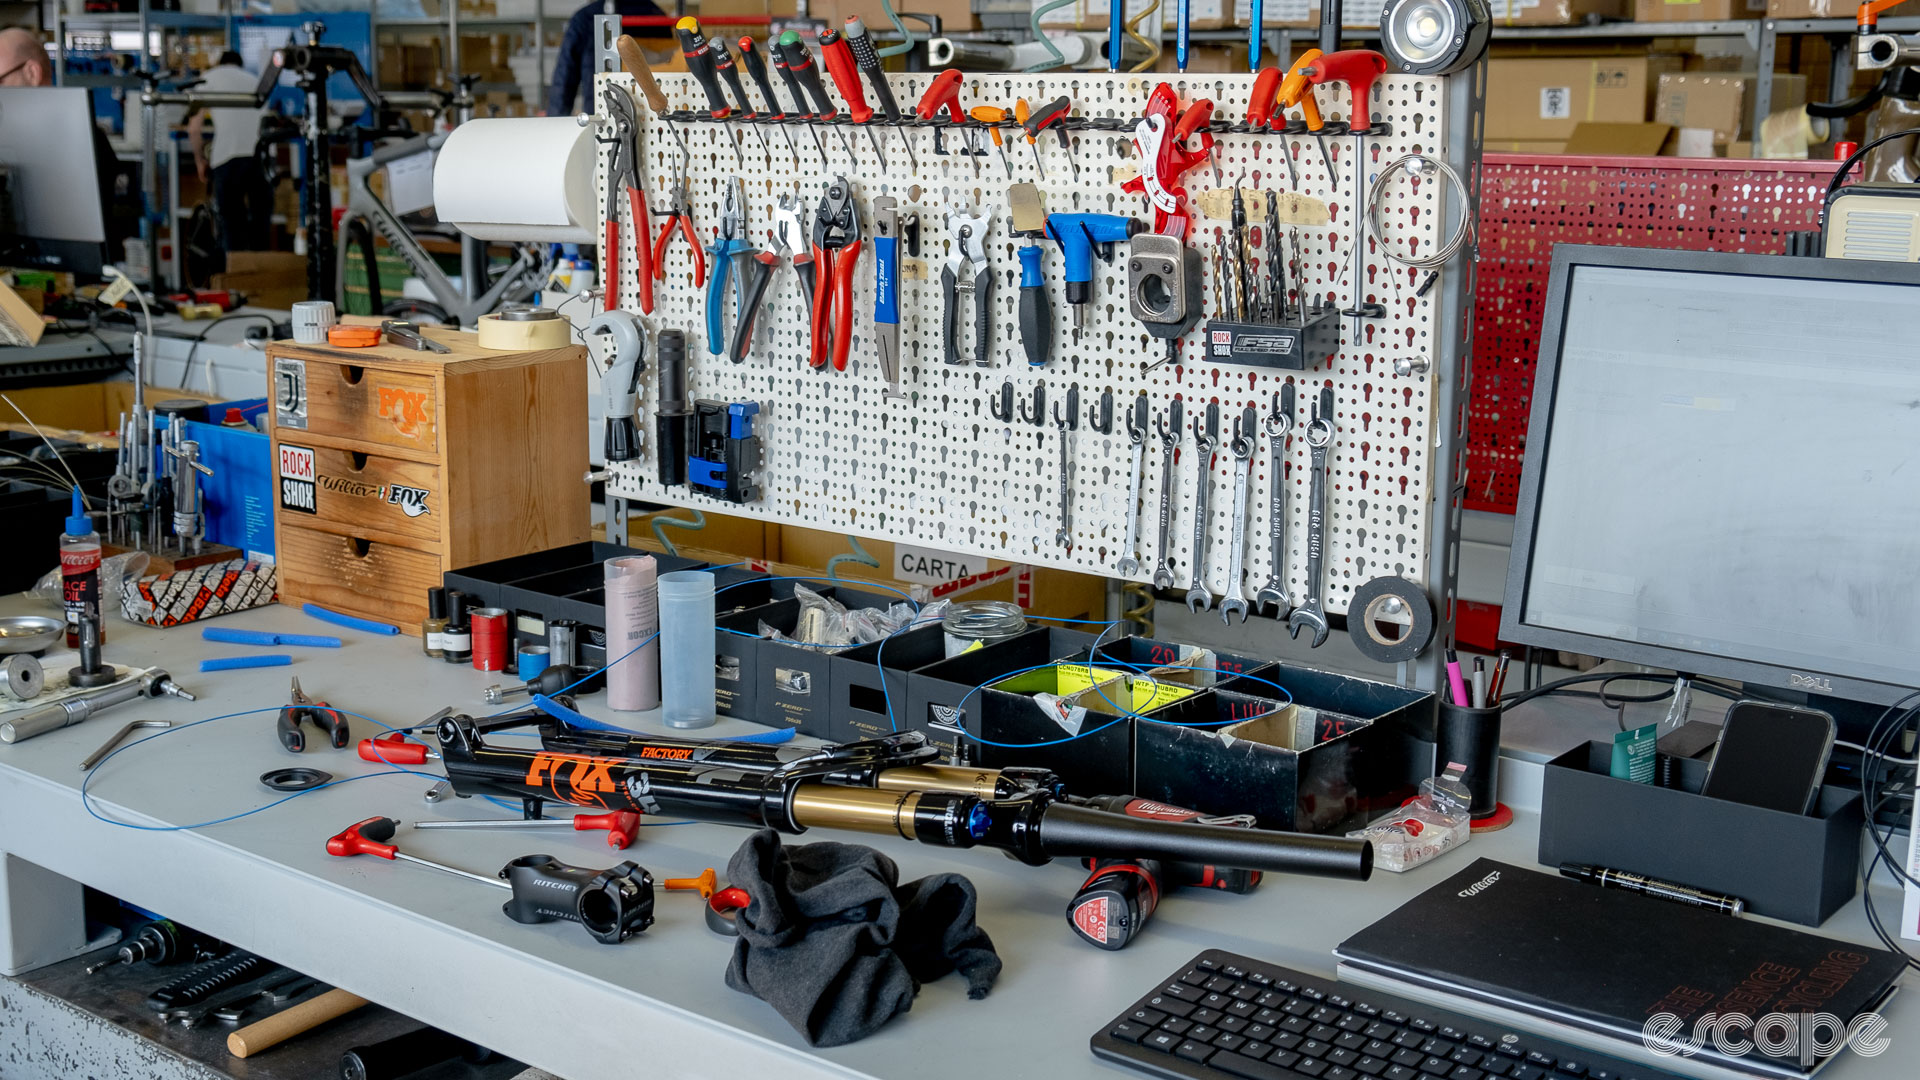 The photo shows one work station on Wilier's assembly line 